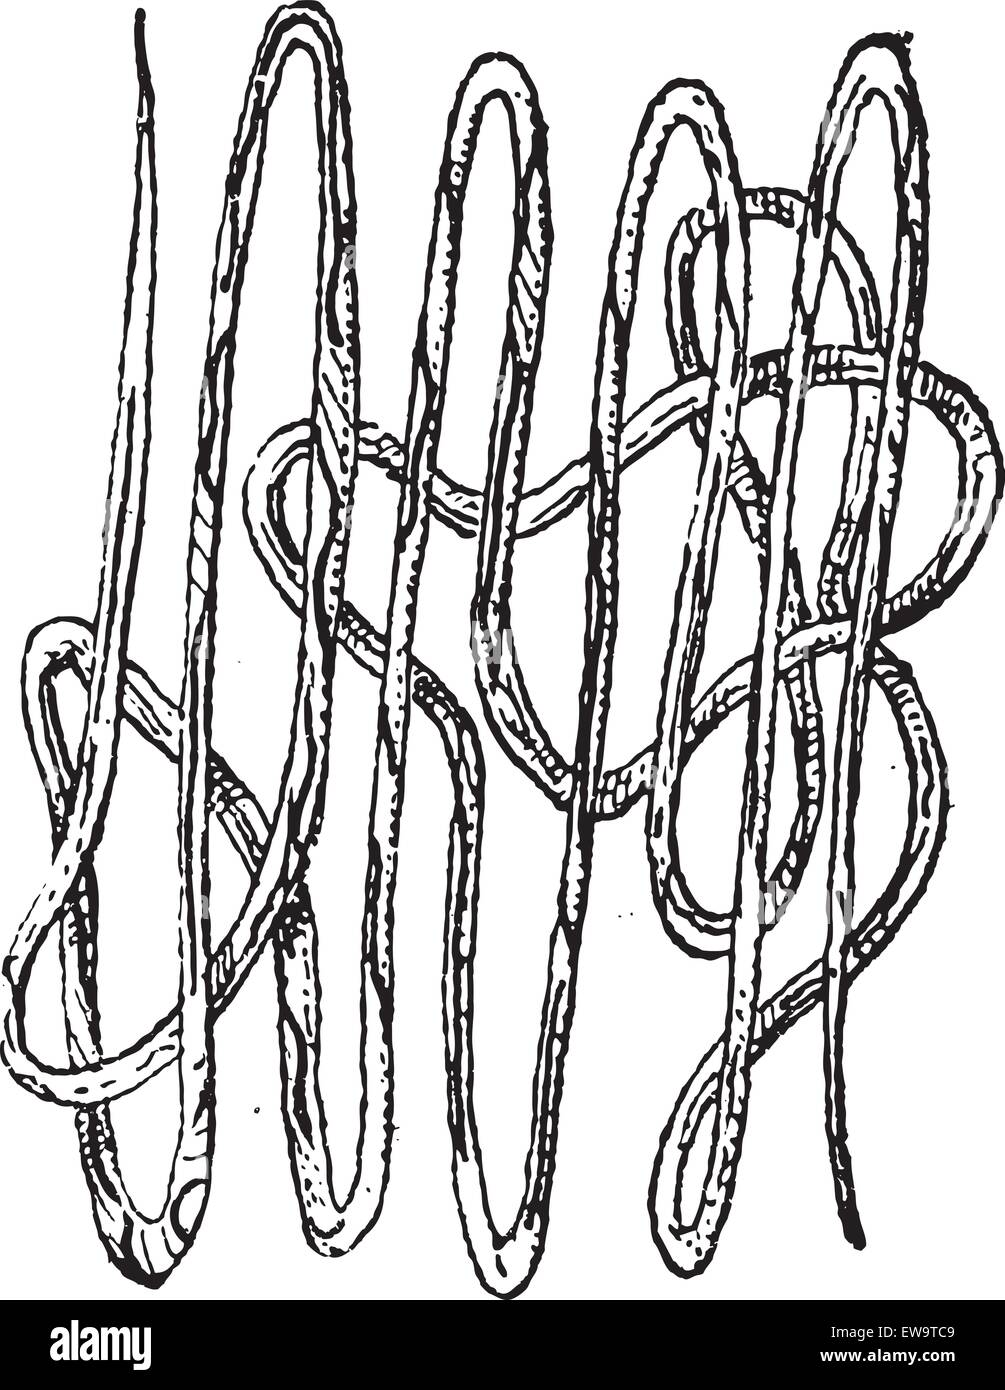 Roundworm, Nematode or Nematoda, vintage engraved illustration. Dictionary of Words and Things - Larive and Fleury - 1895 Stock Vector